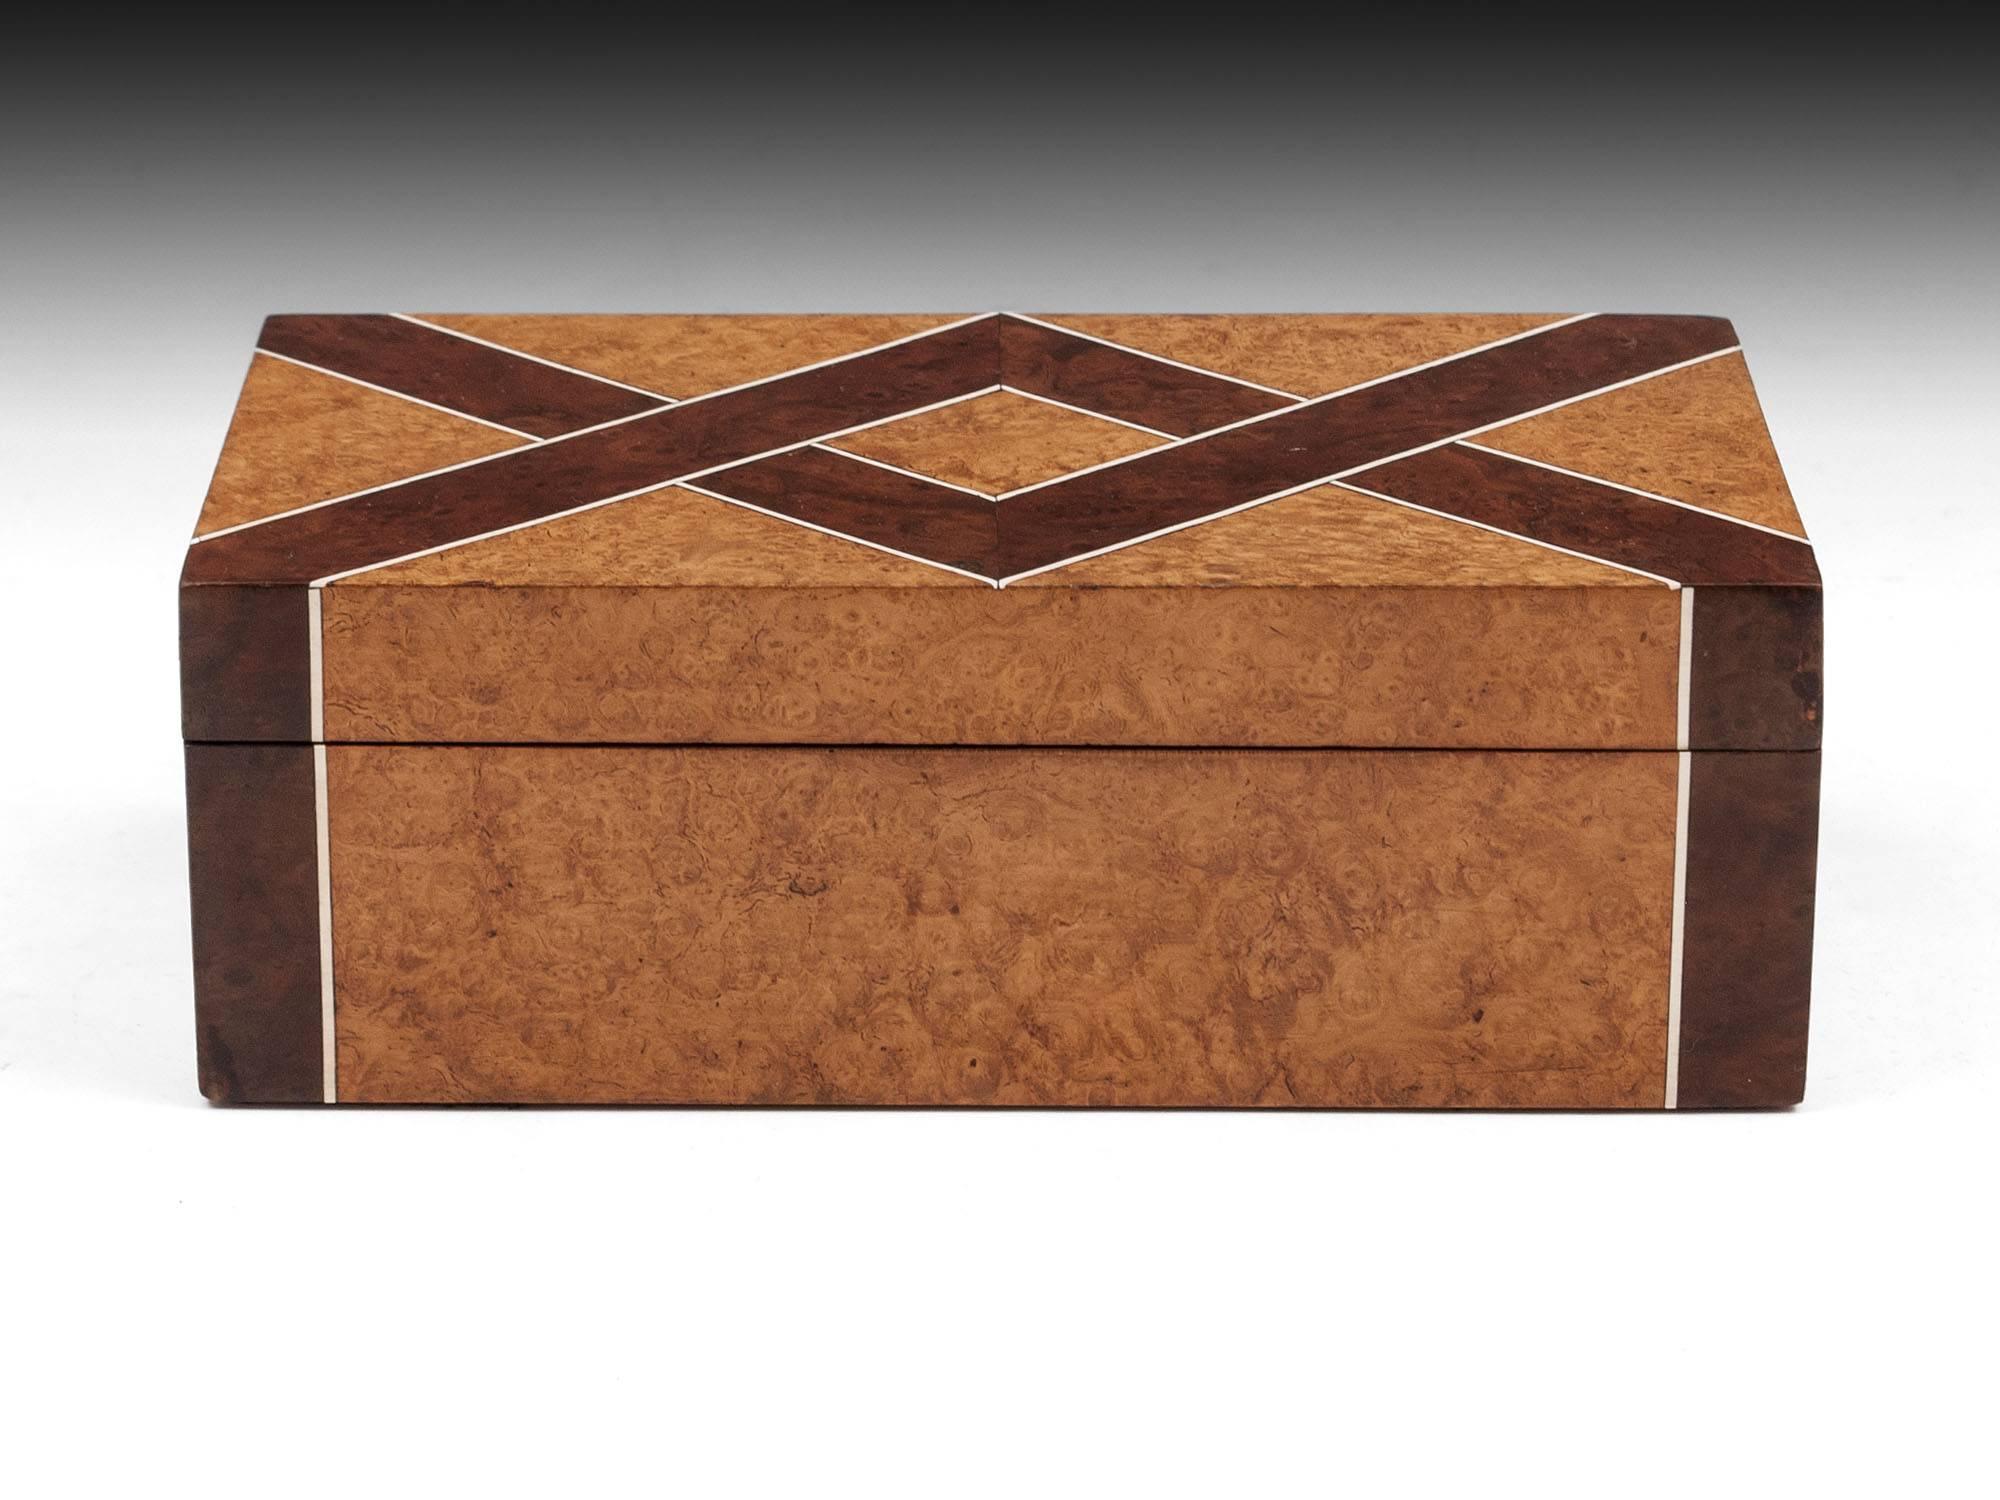 Striking Art Deco trinket box veneered in amboyna with bands of burr walnut with bone inlay either side. 

The interior is cedar lined.